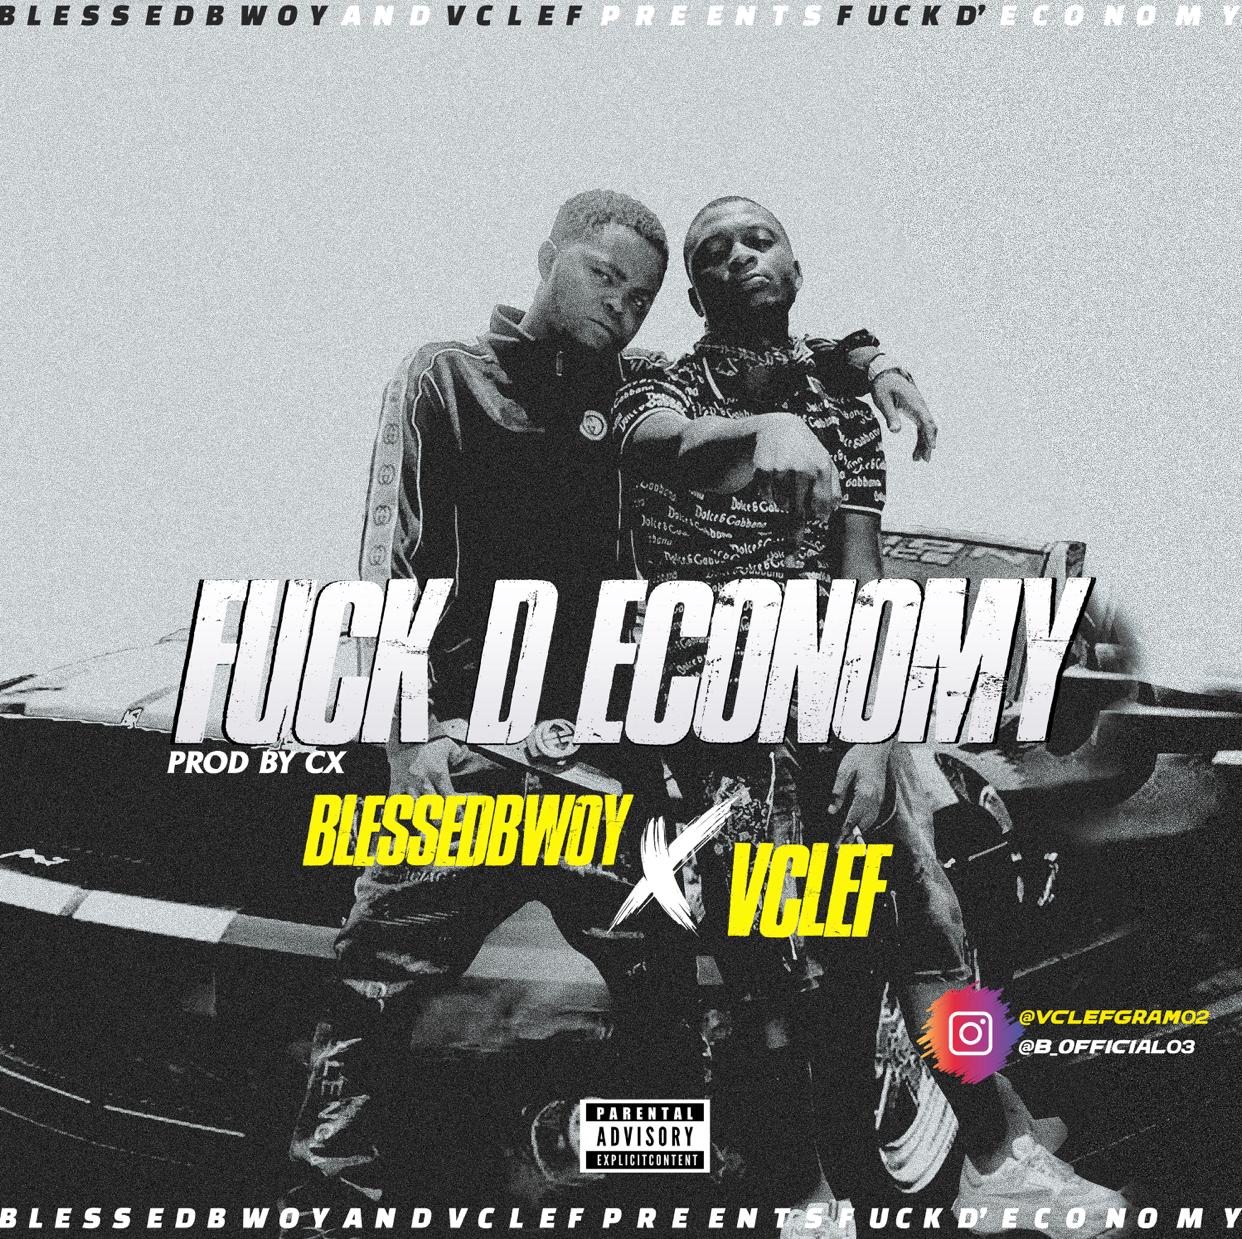 Vclef ft. Blessedbwoy - Fuck D Economy